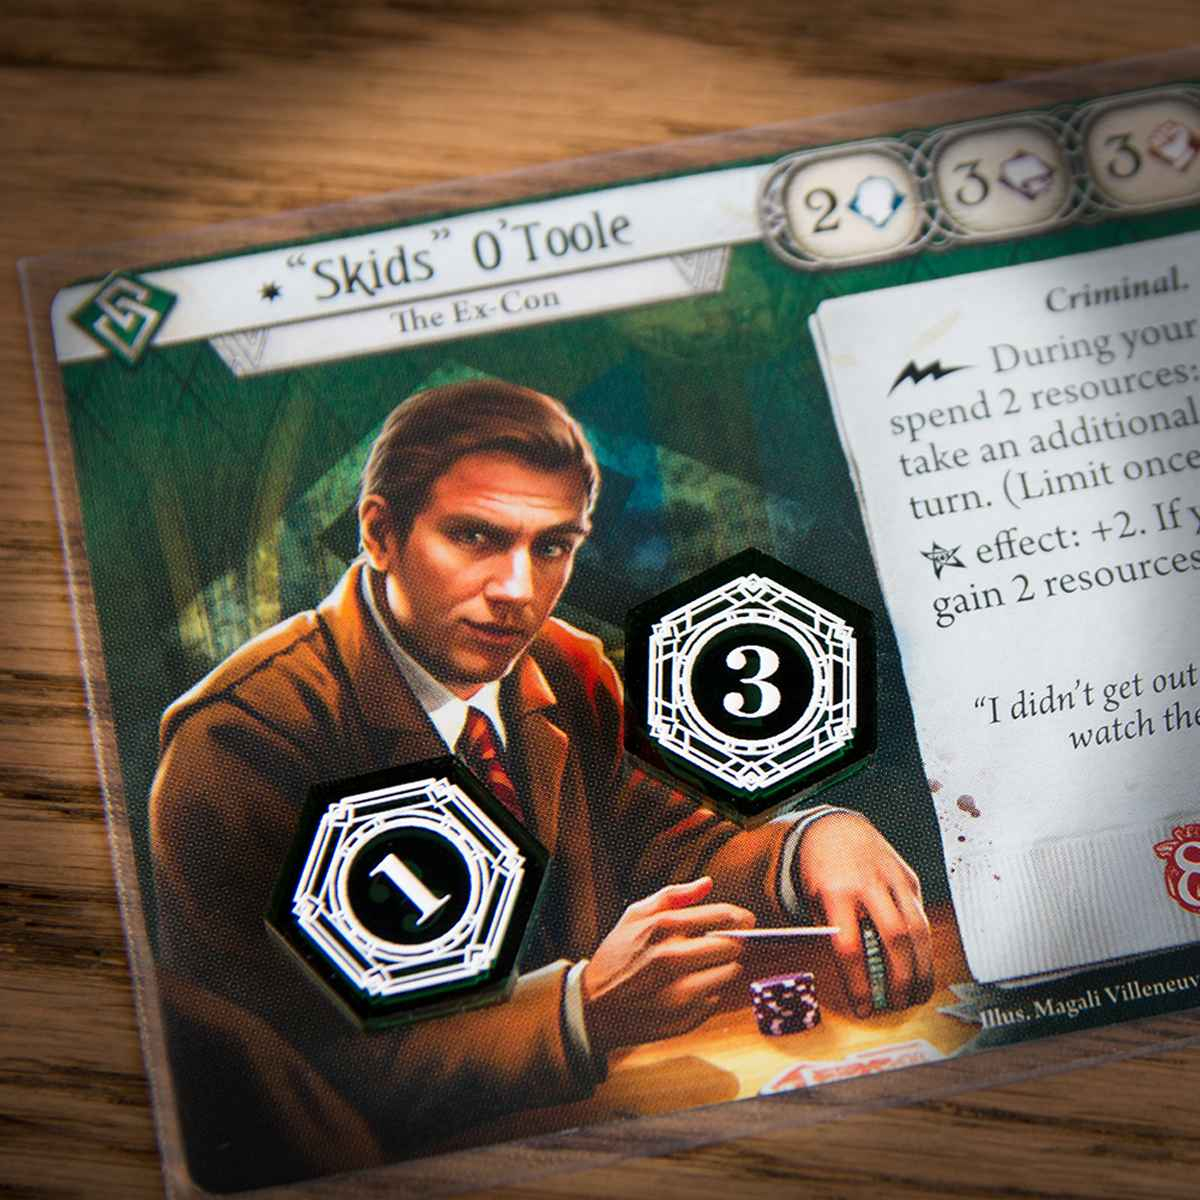 A one-value Resource Token and a three-value Resource Token on the Arkham Horror LCG card, Skids O’Toole